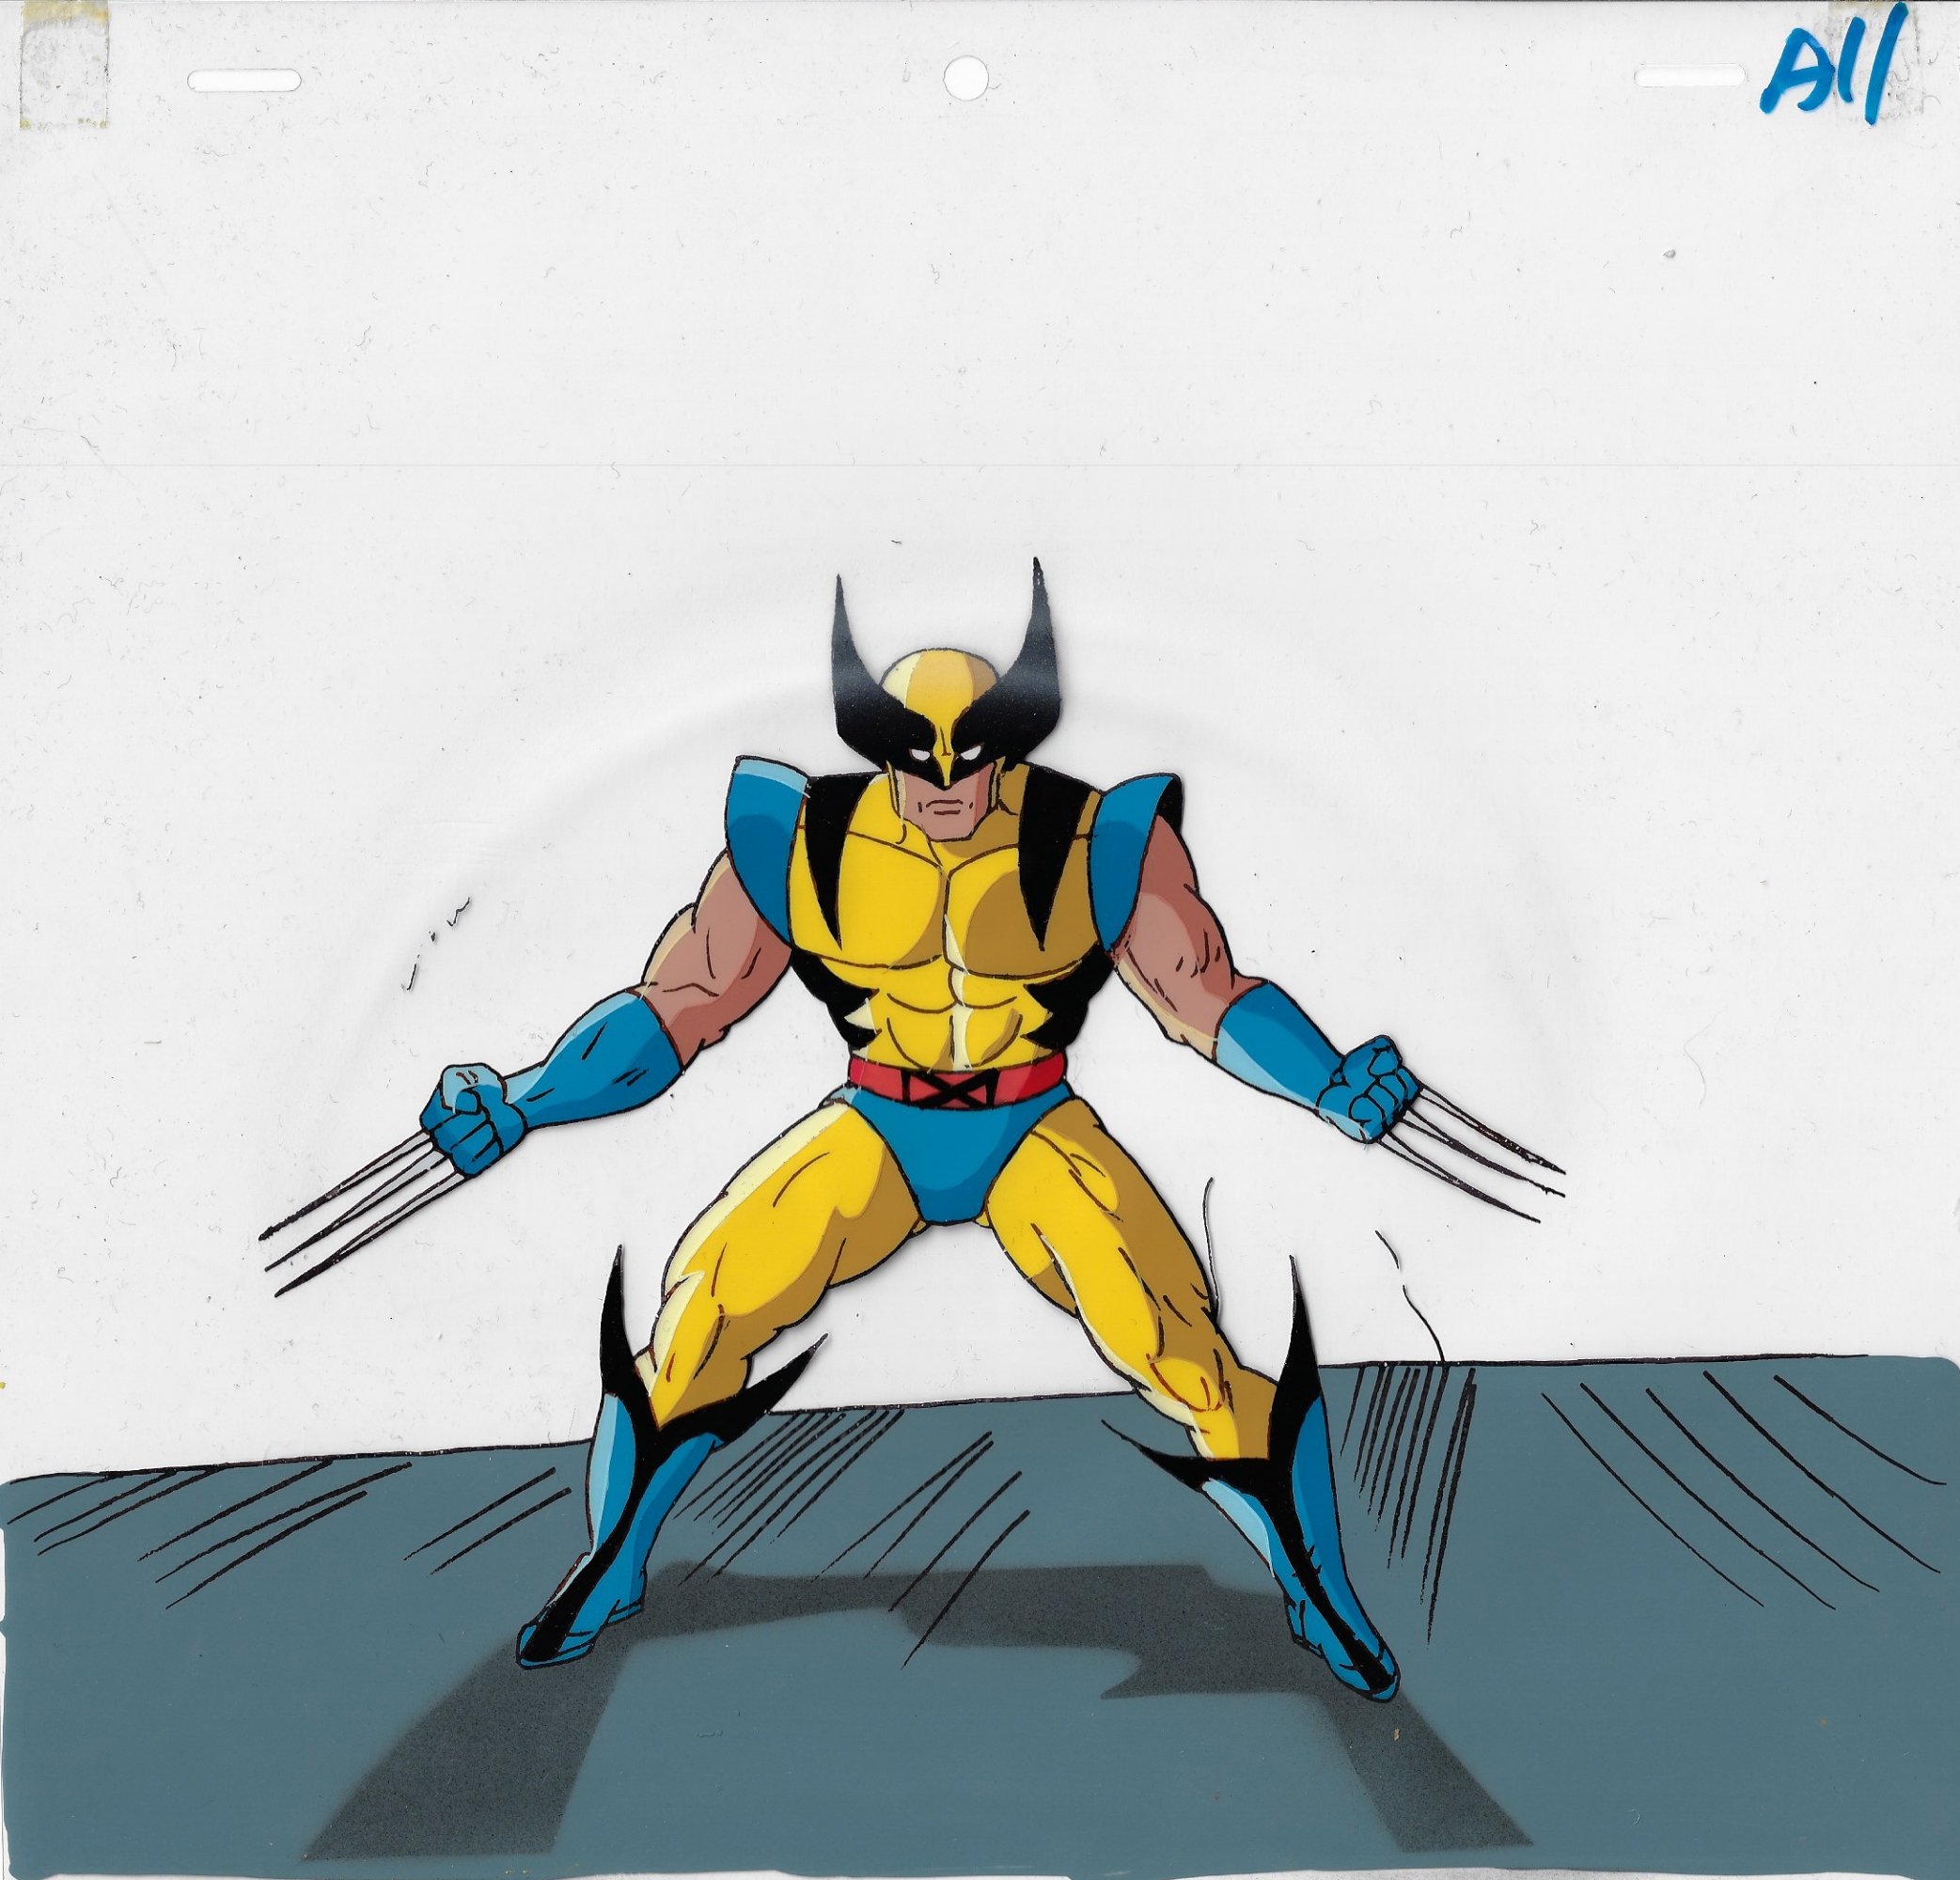 X-men The Animated Series Wolverine Cel from the main opening scene , in  Jon B's X-Men The Animated Series Art Comic Art Gallery Room